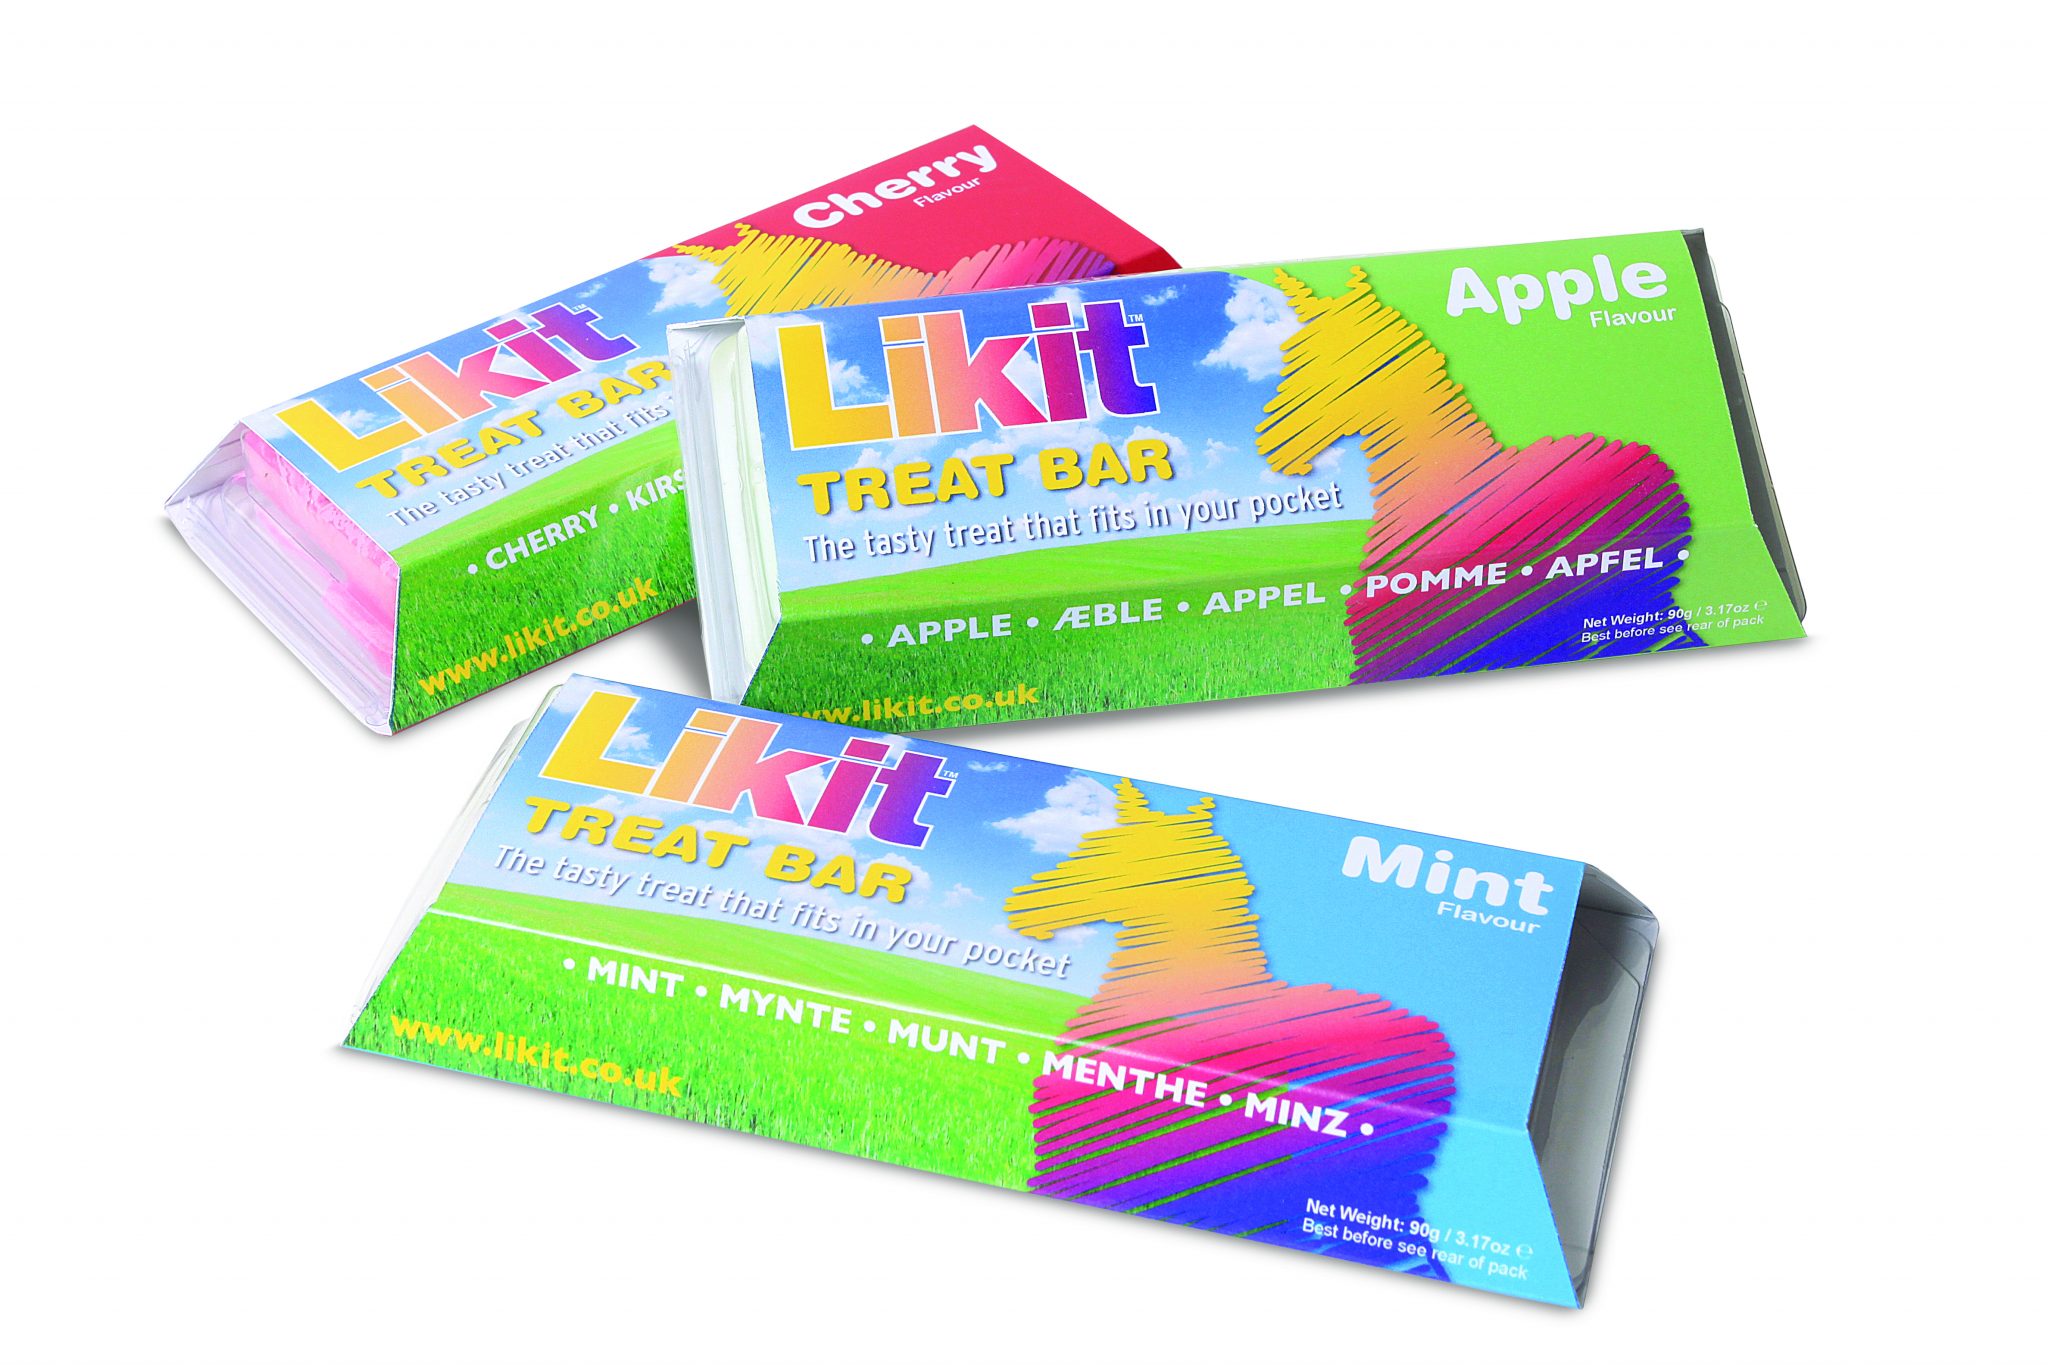 90g Apple Cherry or Mint flavors LIKIT Treat Bars resealable pack. 